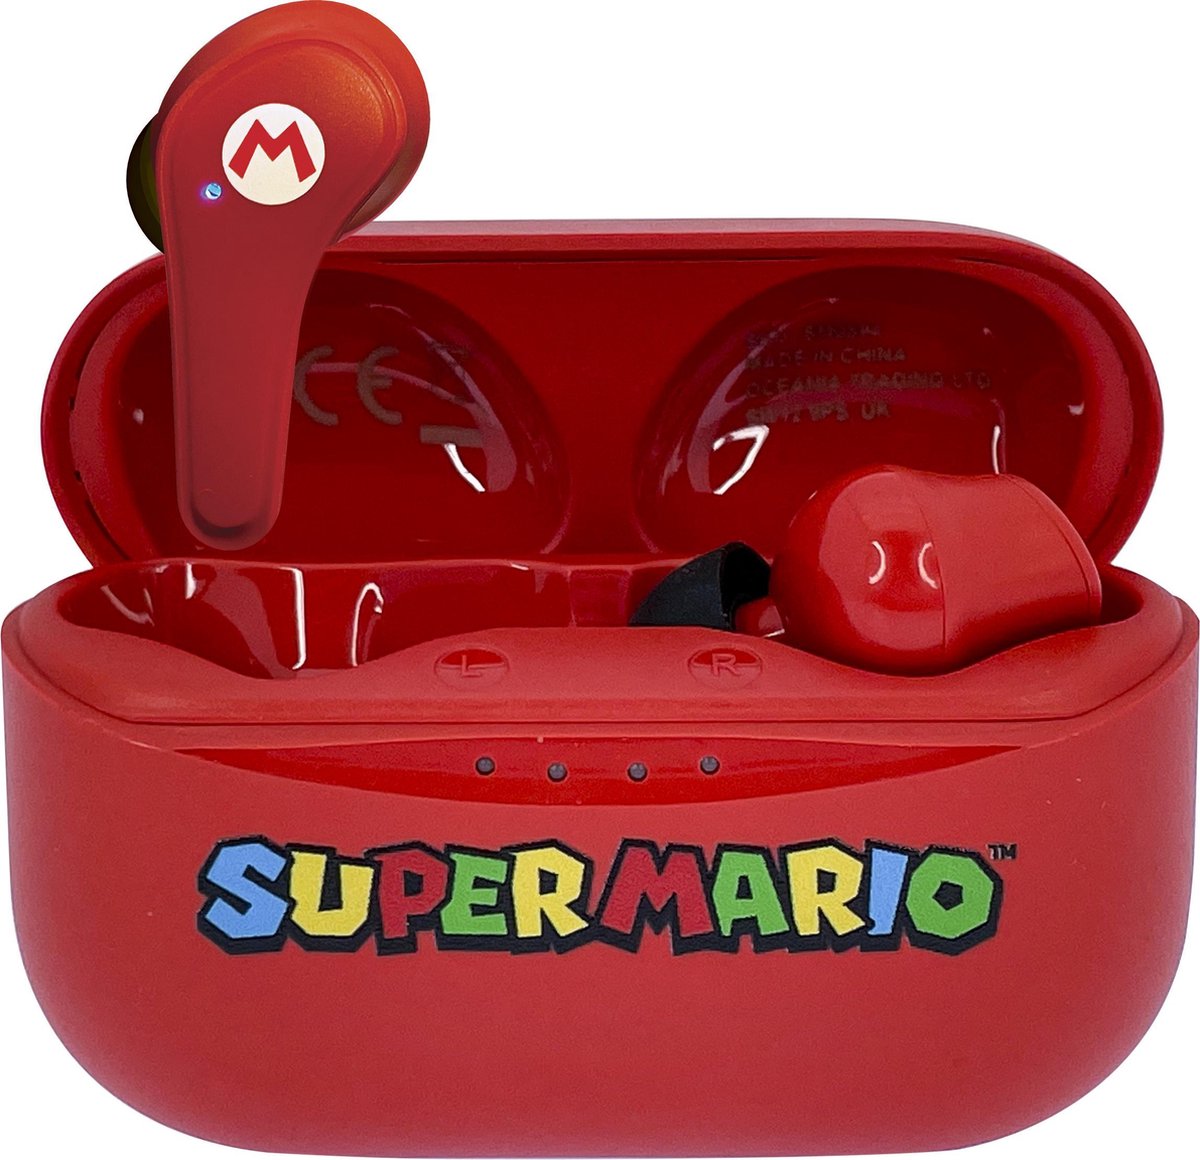 Super Mario - TWS earpods - oplaadcase - touch control - extra eartips (rood)